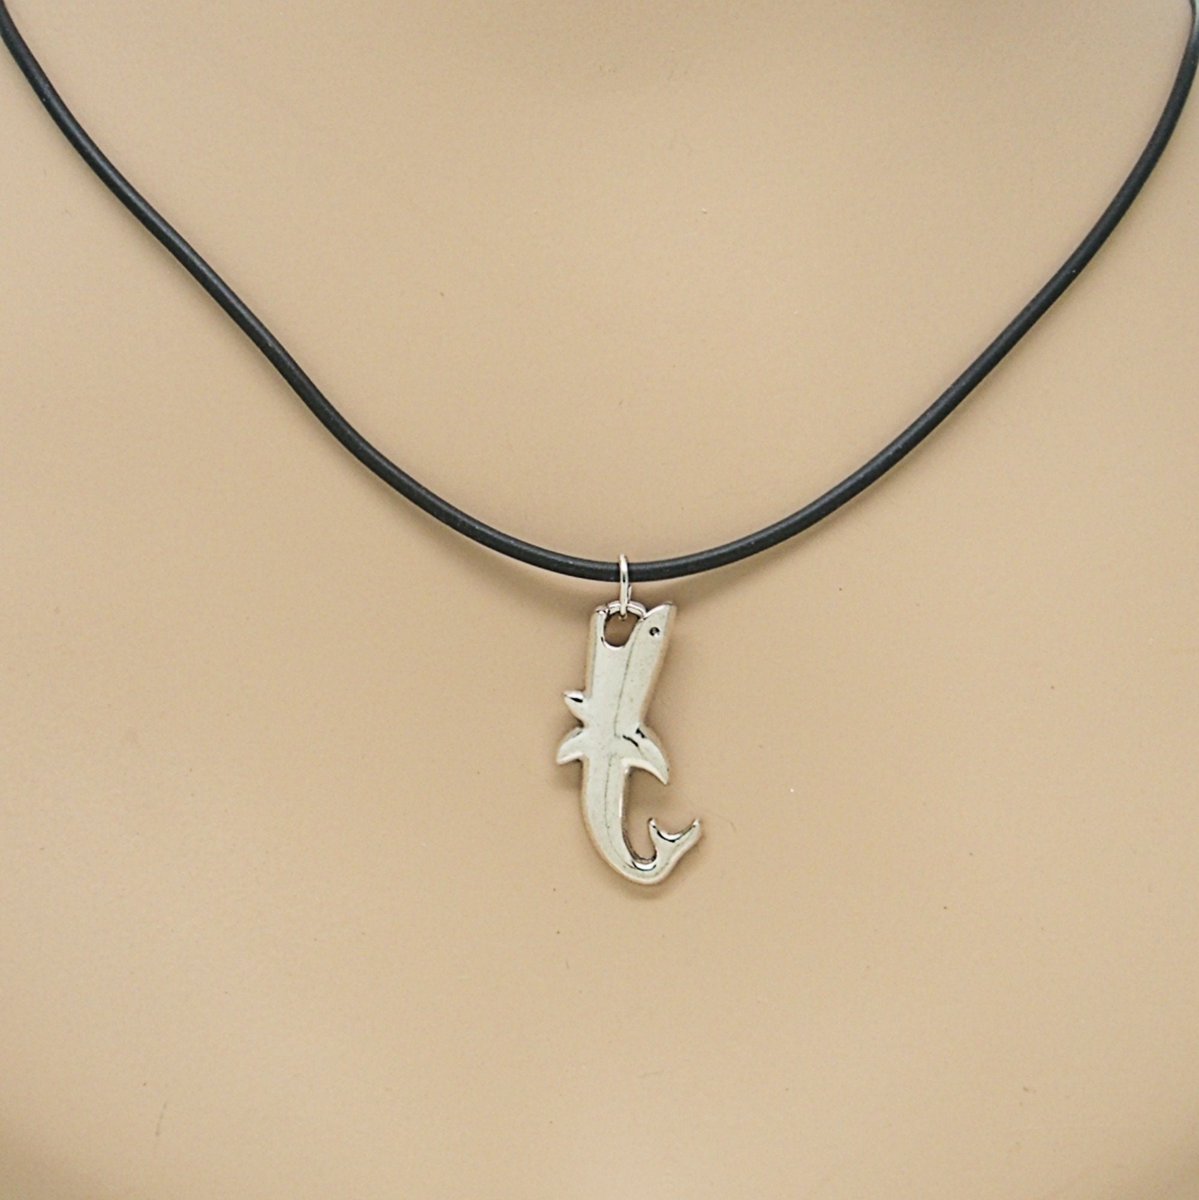 Silver Shark Necklace Pendant on Black Rubber Cord Surfer SUP Beach Kids to Adults 14 to 19.5 inches 9002-76 #WomensNecklace #MinimalNecklace 
$10.50
➤ etsy.com/listing/961870…